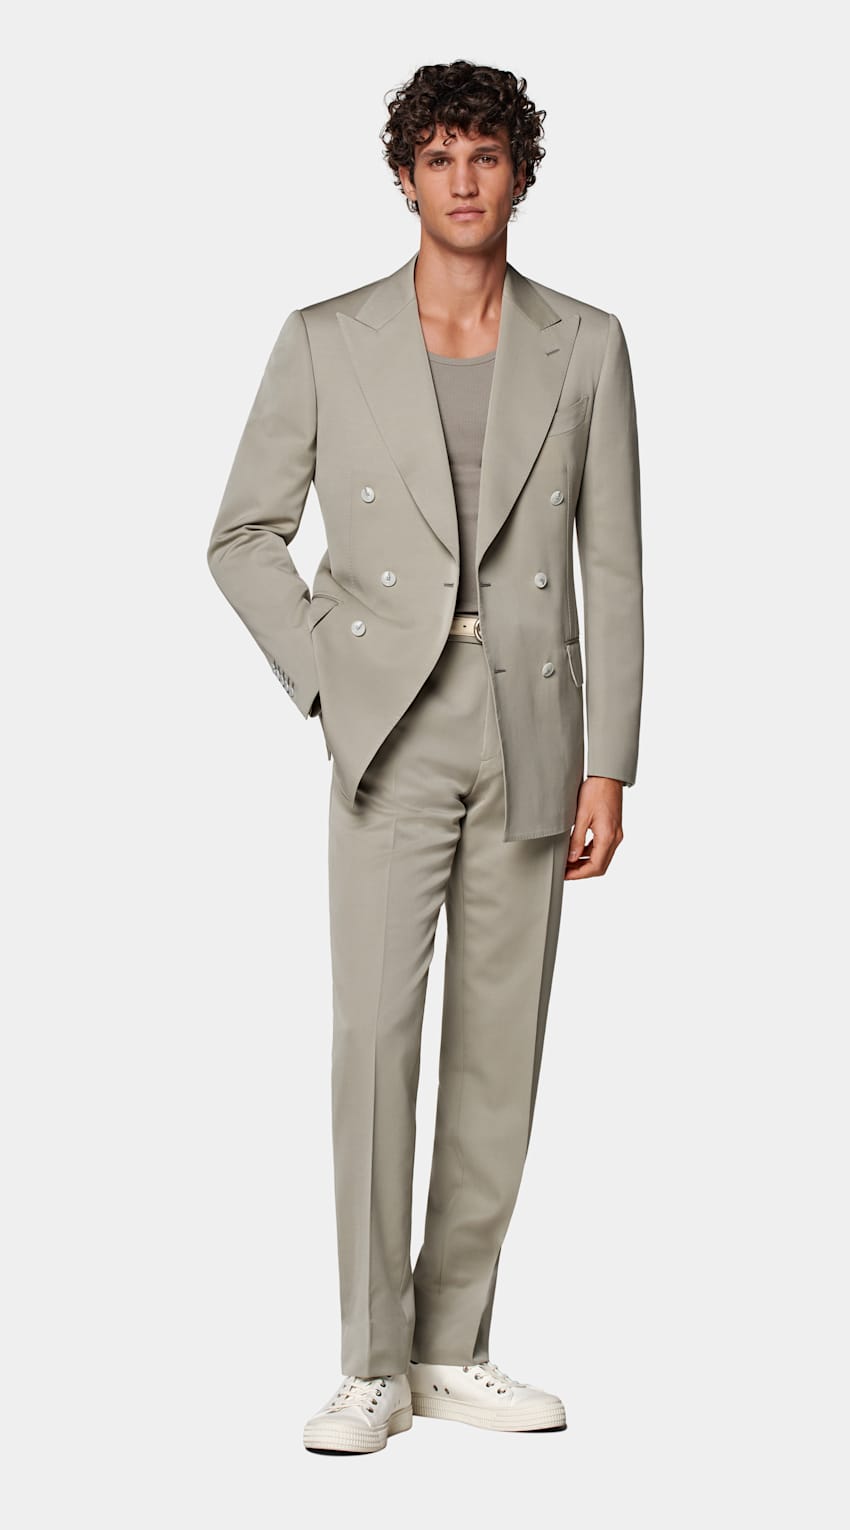 SUITSUPPLY Laine, mohair - Botto Giuseppe, Italie Costume Milano coupe Tailored vert clair